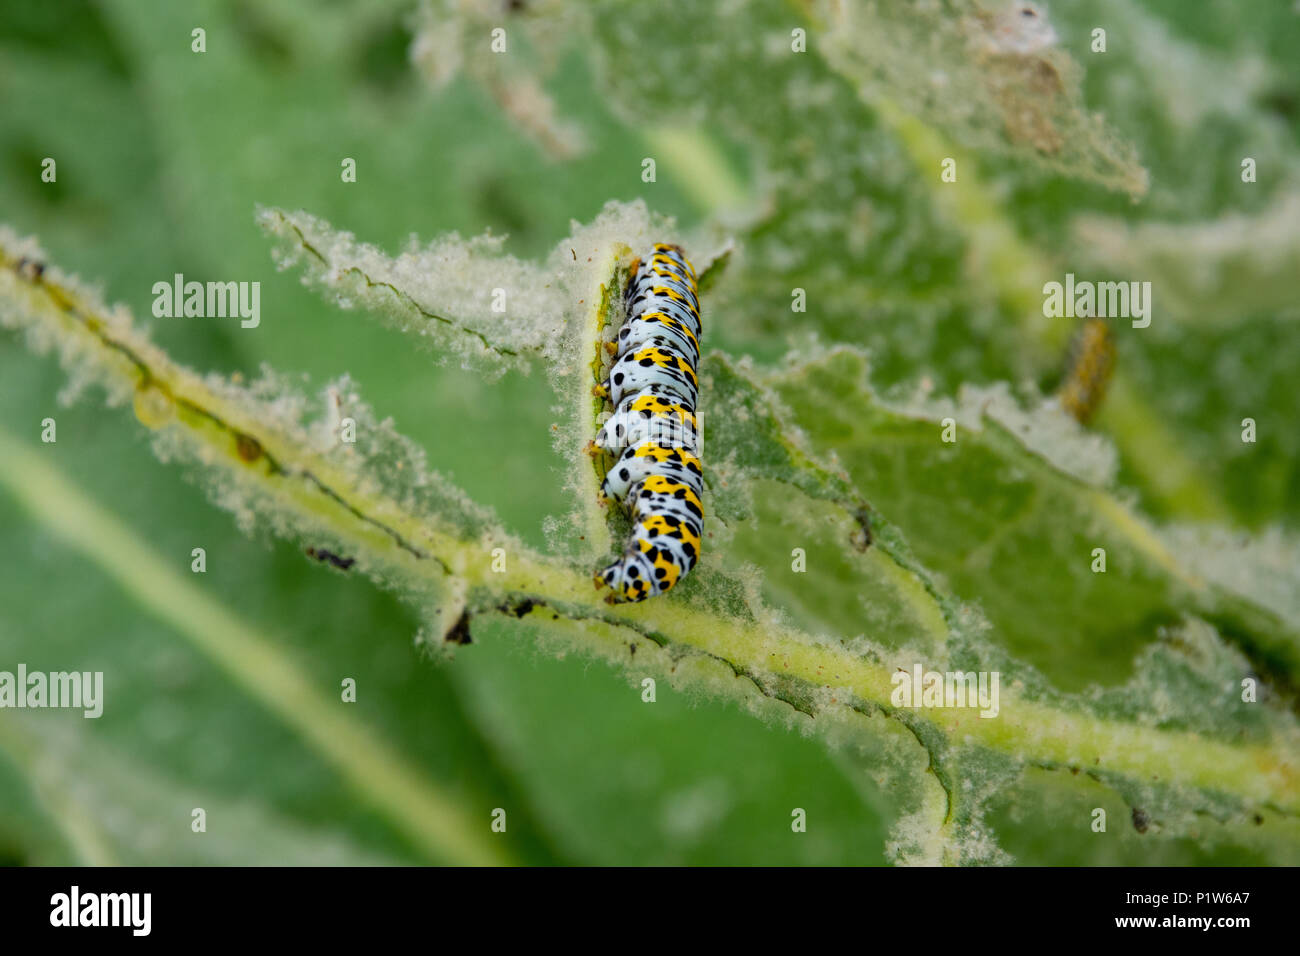 Green and Black Mullein Cucullia verbasci  Caterpilllar eating on well chewed leaf Stock Photo